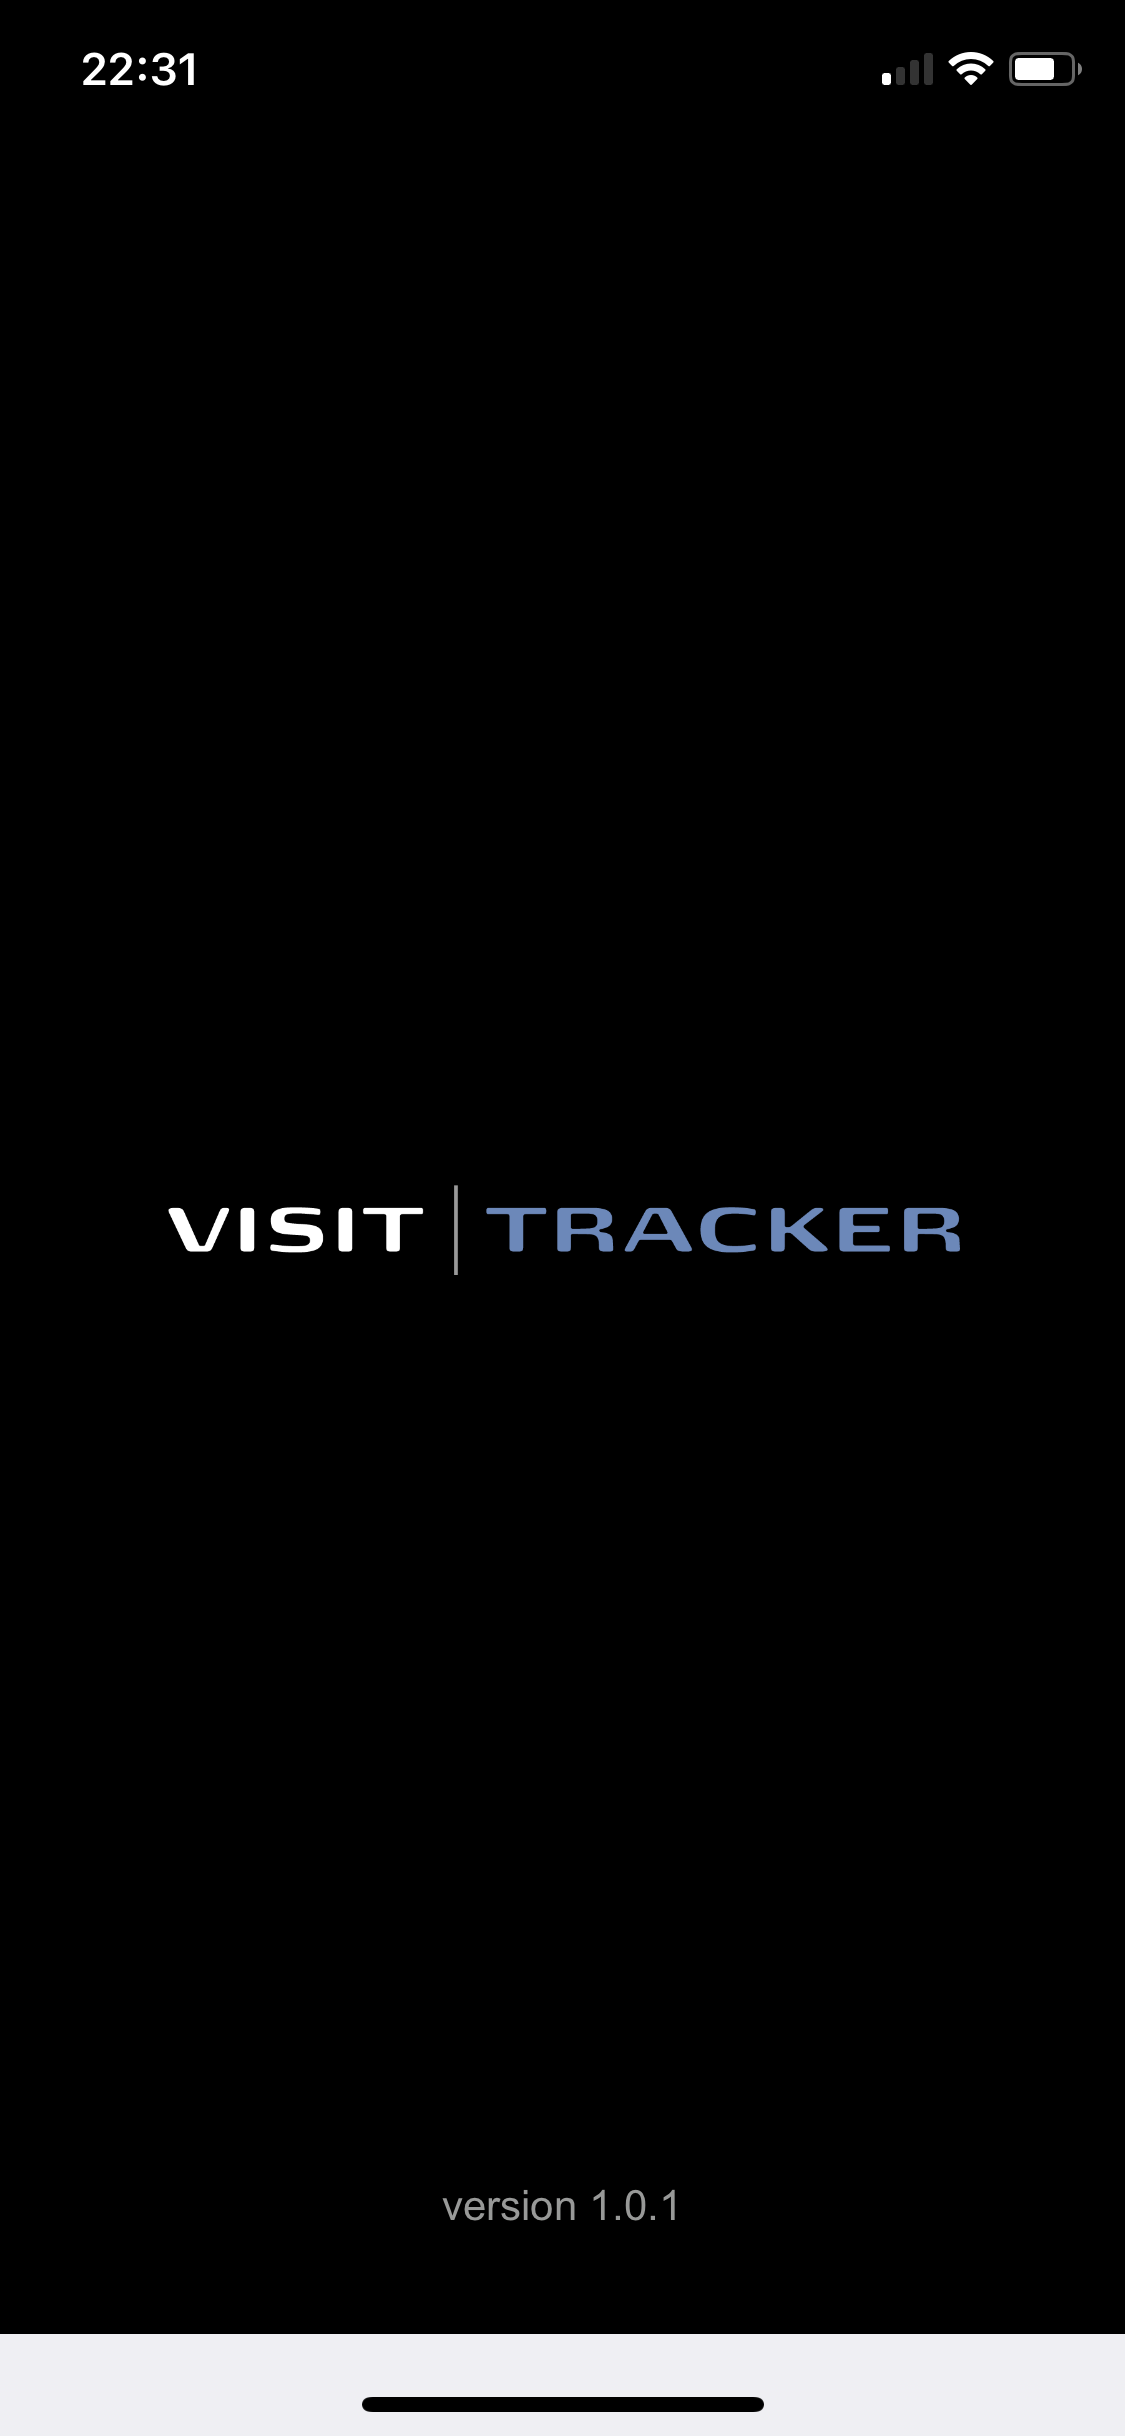 the visit tracker